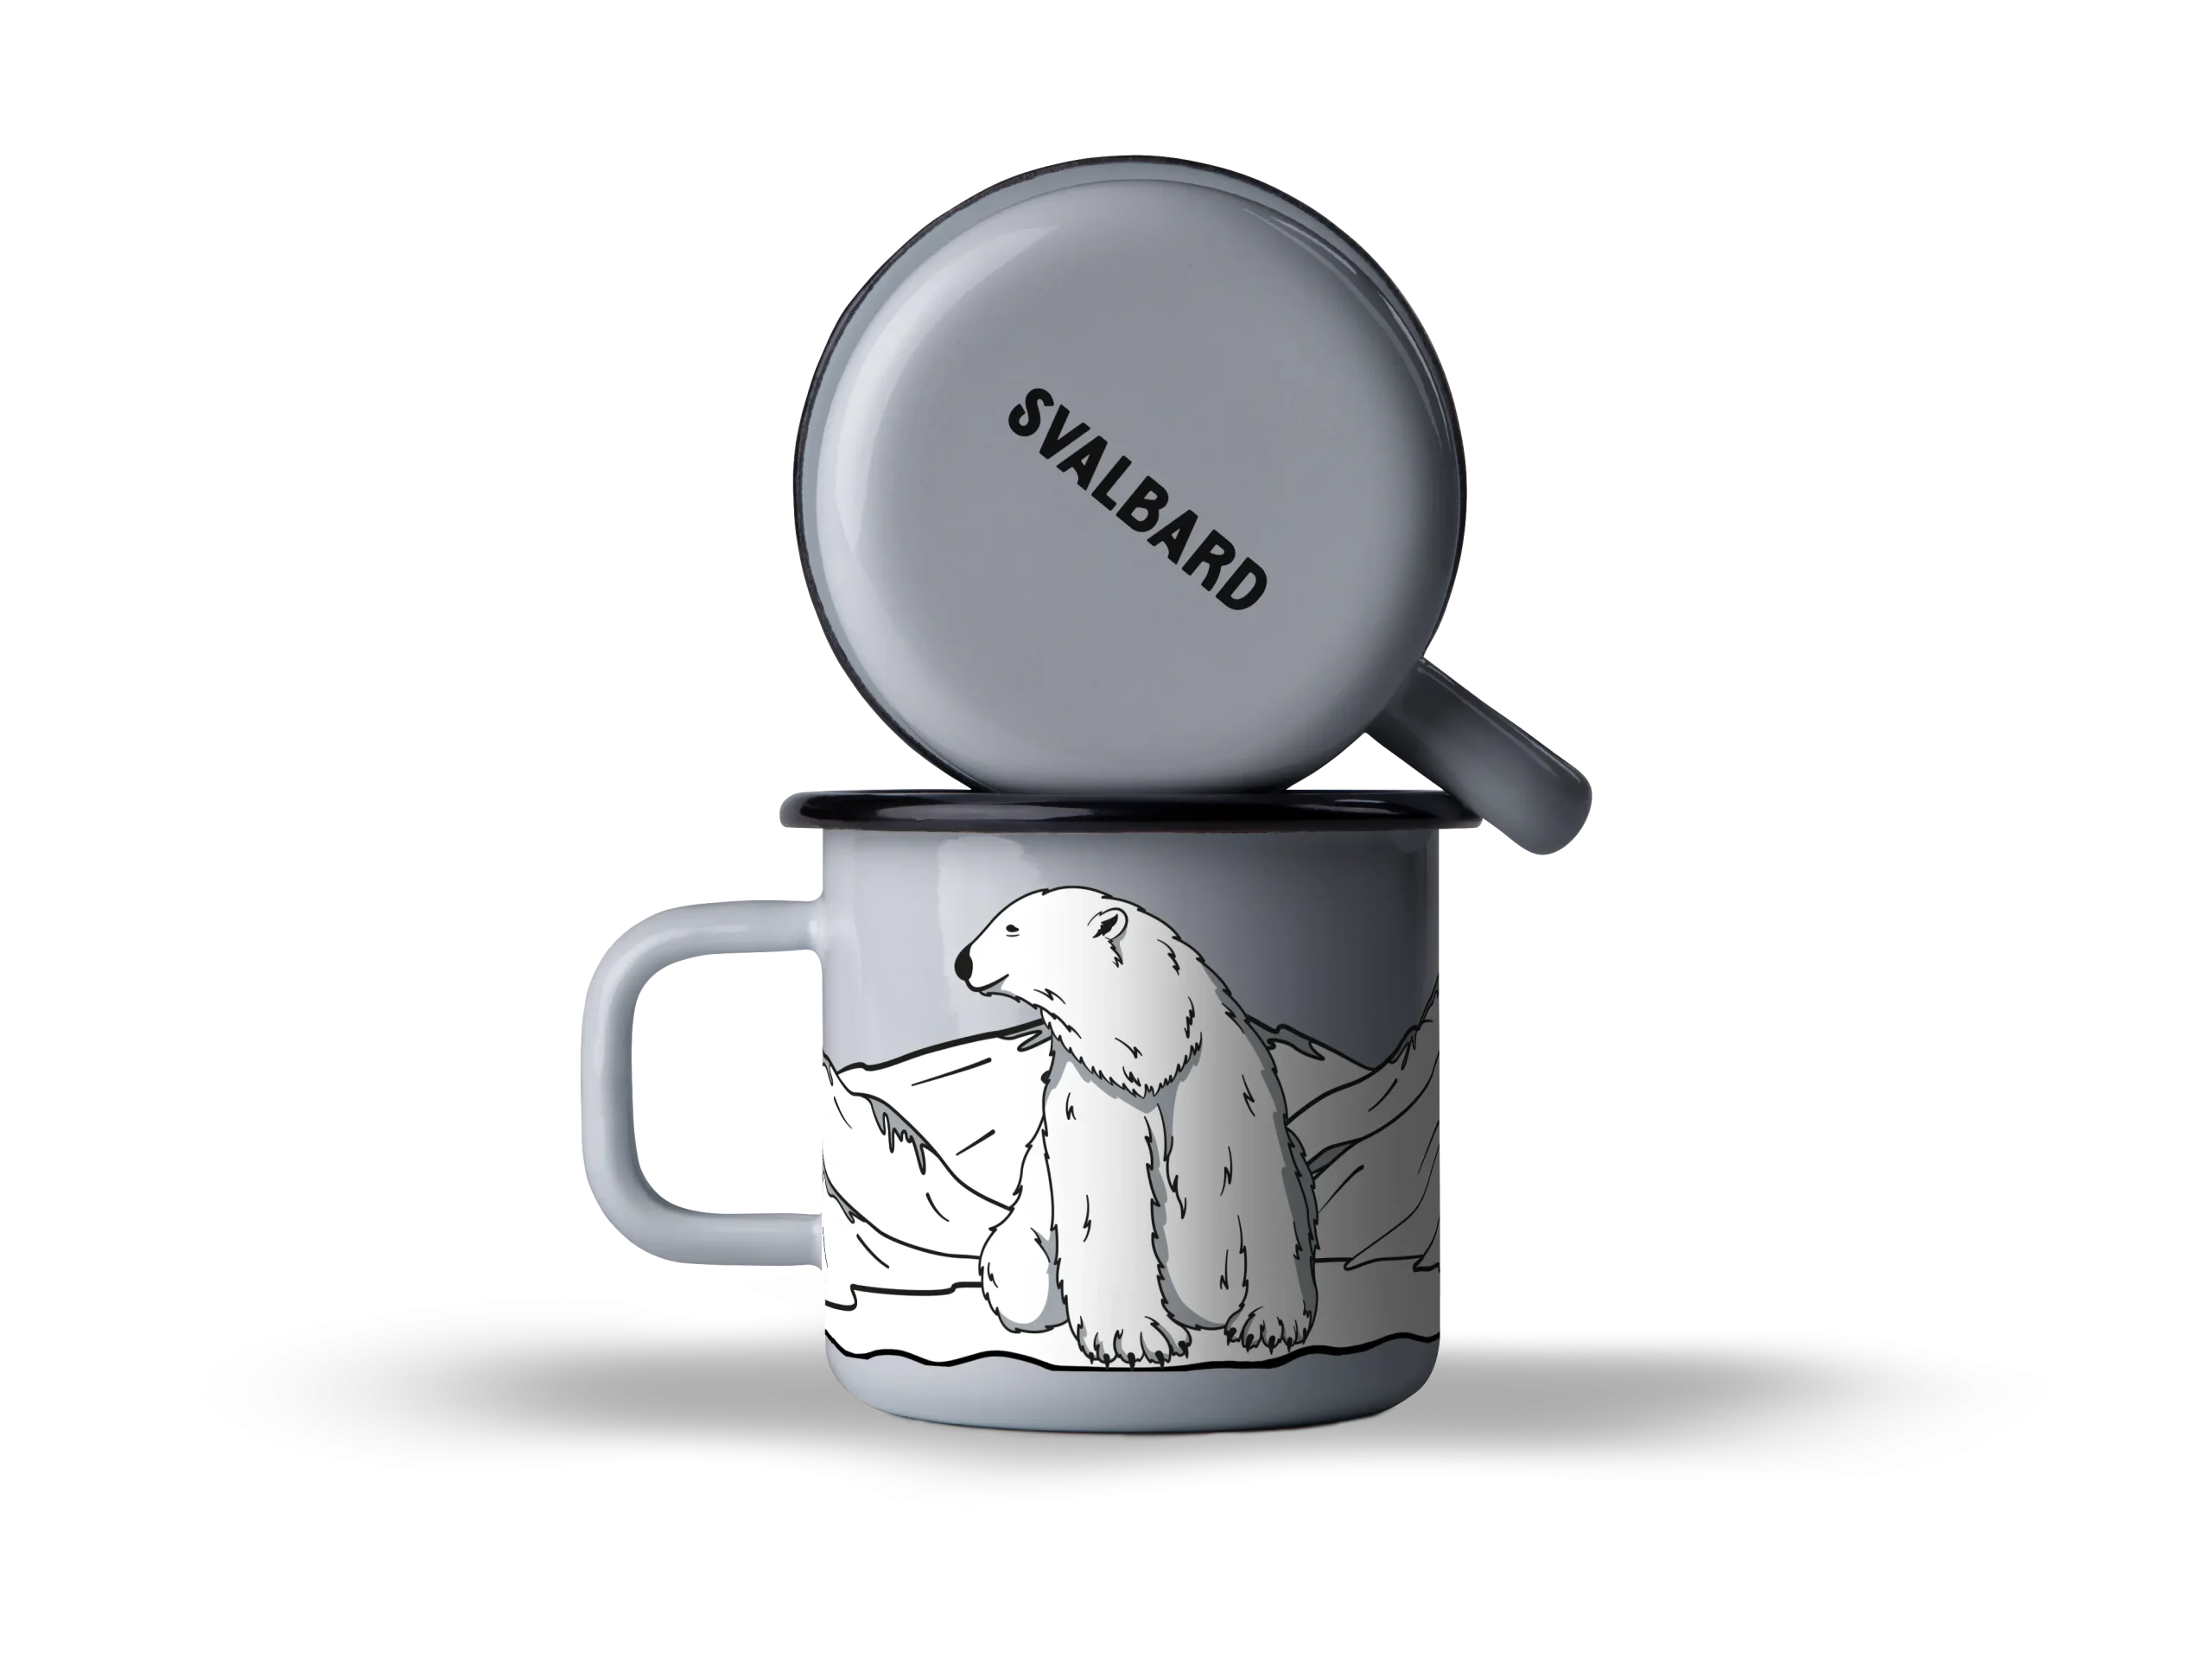 An image of a white enamel mug with a dark rim and handle, featuring an illustration of a polar bear in a sitting pose against a backdrop of ice or mountains. The lid of the mug, also white with a dark rim, is leaning against the mug and has "SVALBARD" written across it in a simple font. The mug and lid are set against a dark background with horizontal stripes, providing a stark contrast that highlights the items. The design elements of the mug evoke a sense of the Arctic environment associated with Svalbard.